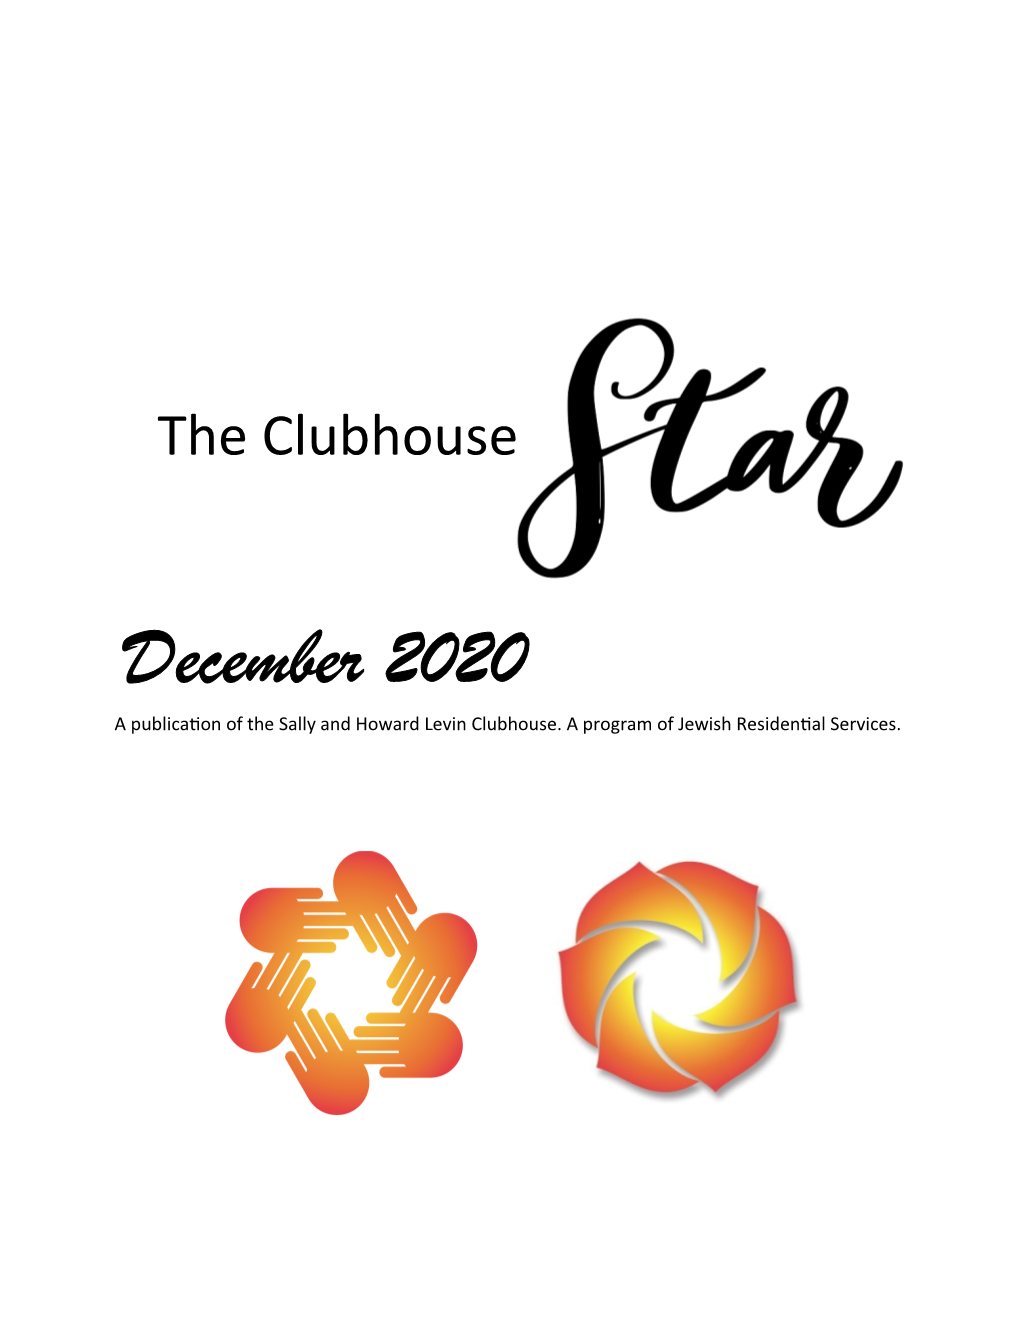 December 2020 a Publication of the Sally and Howard Levin Clubhouse